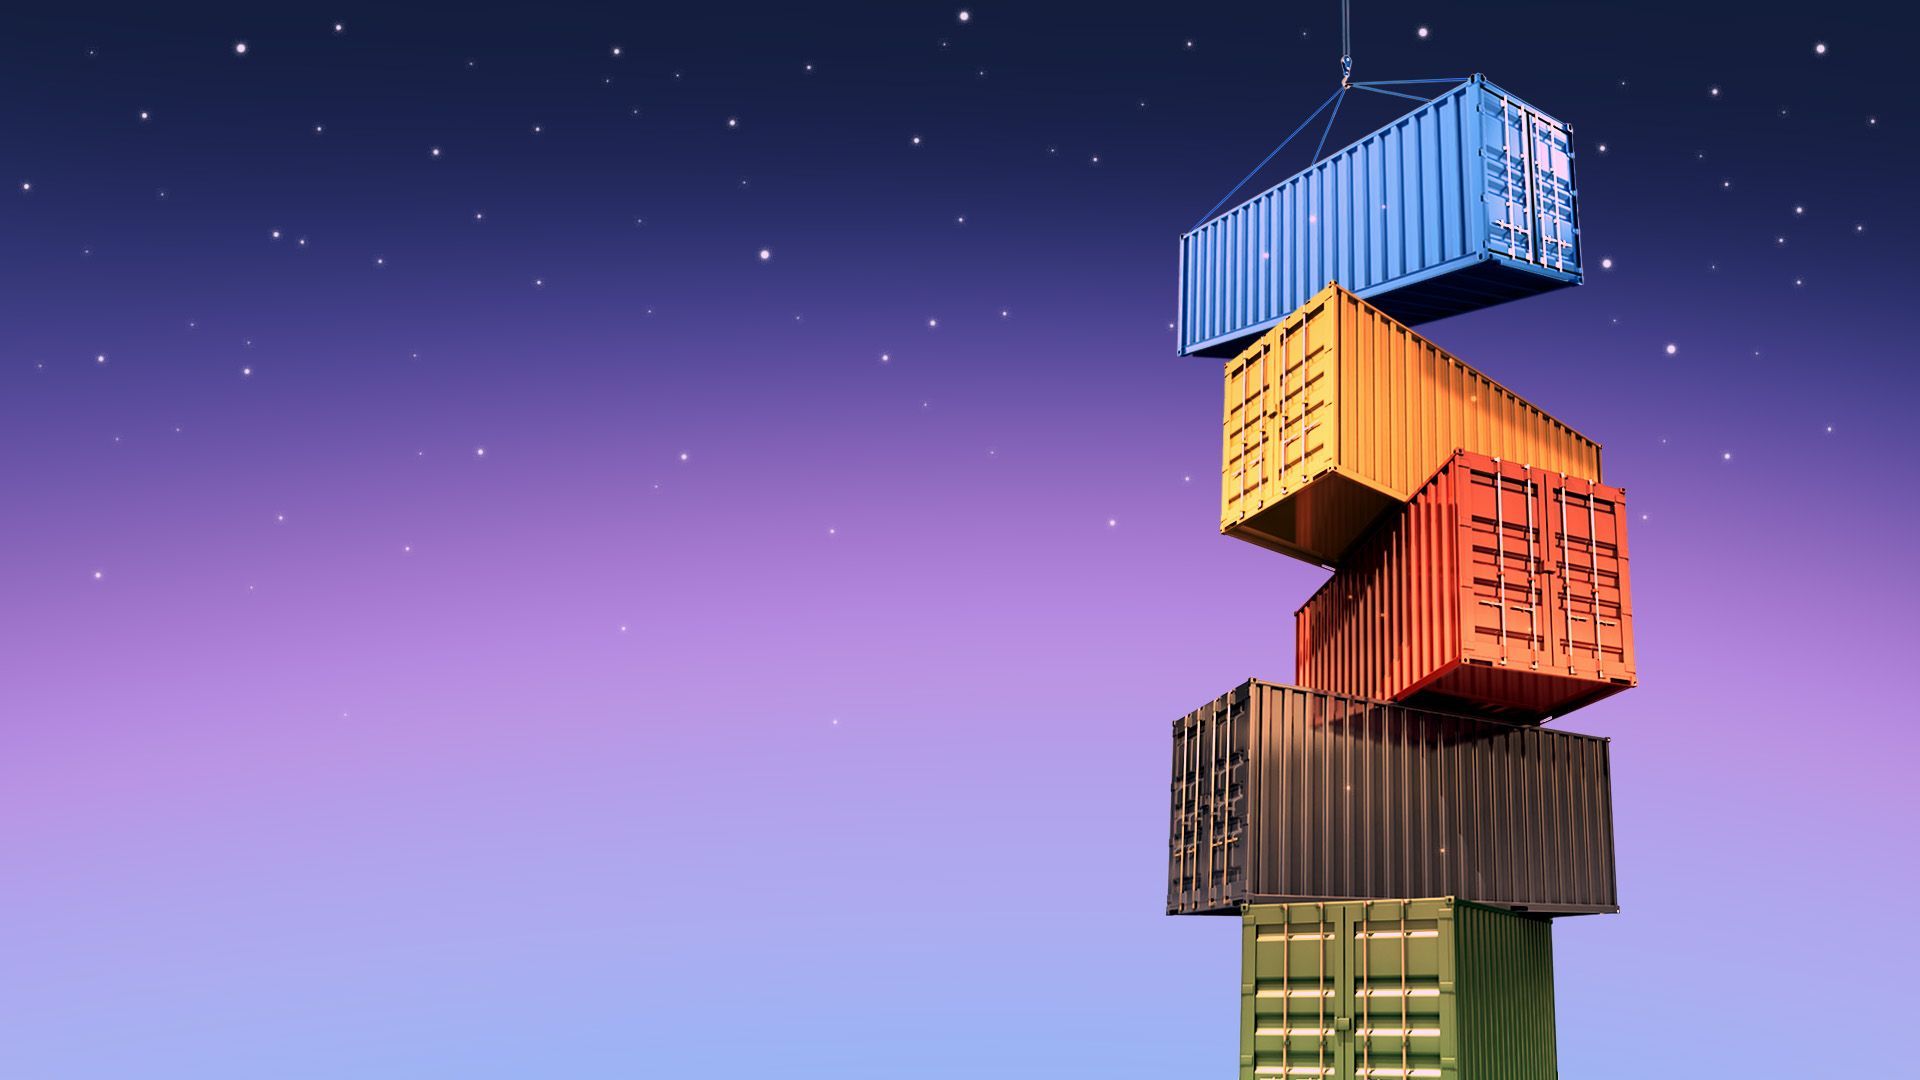 Illustration of a stack of shipping crates extending into space